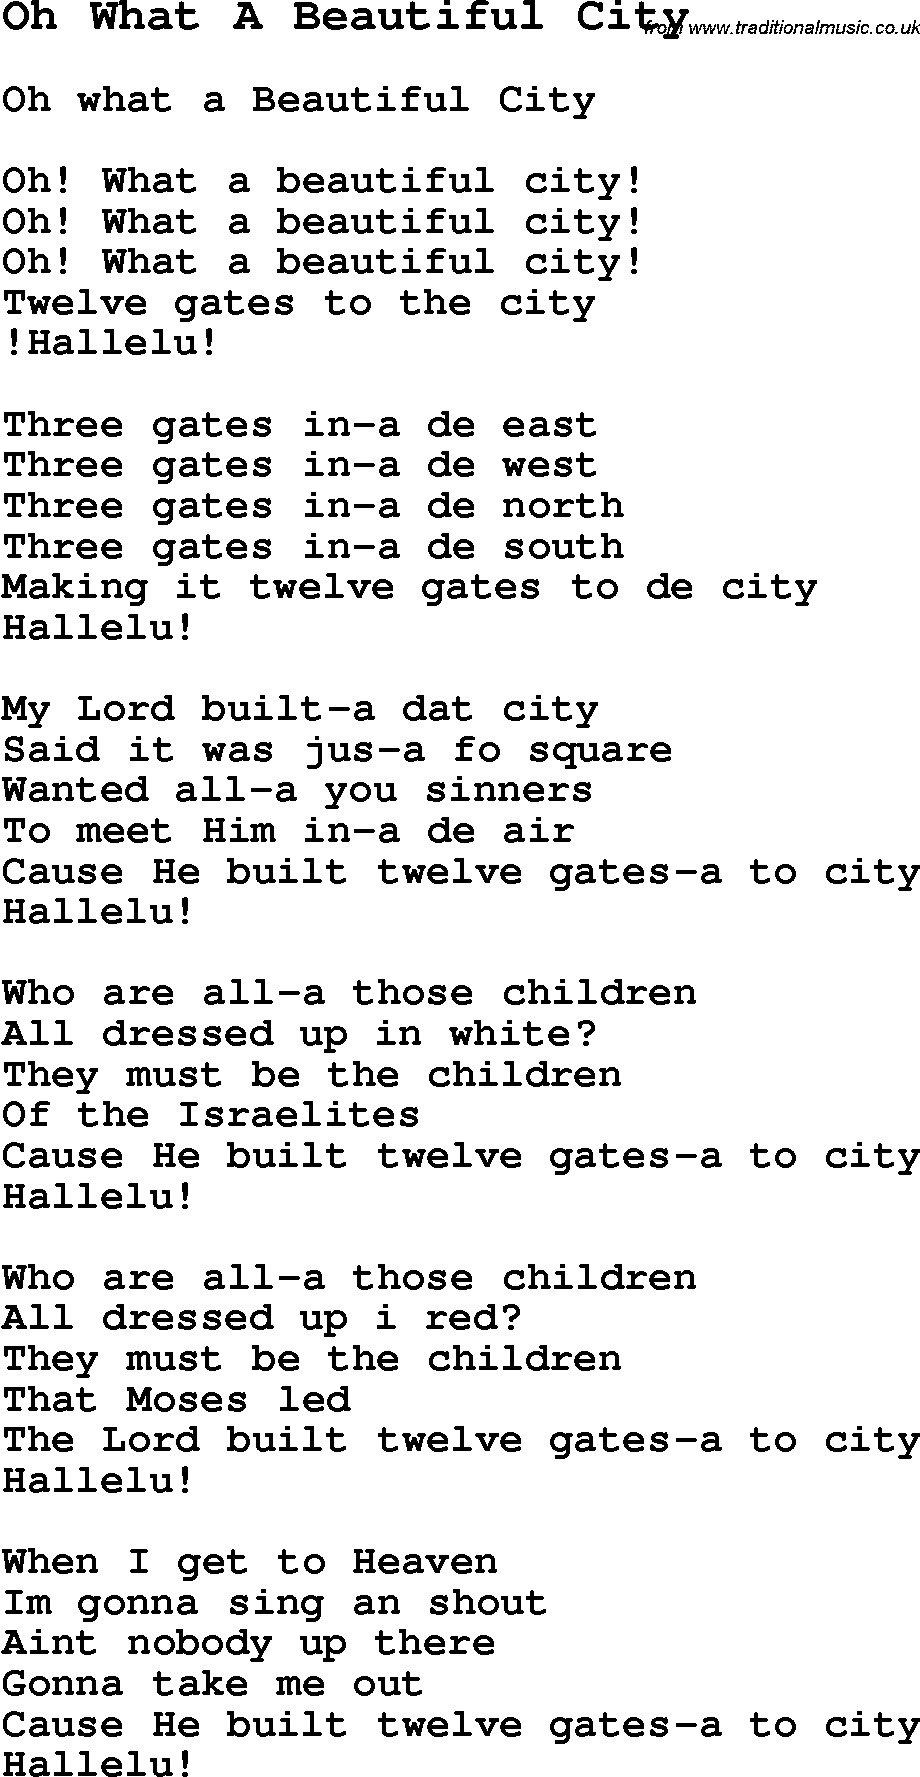 Negro Spiritual Song Lyrics for Oh What A Beautiful City